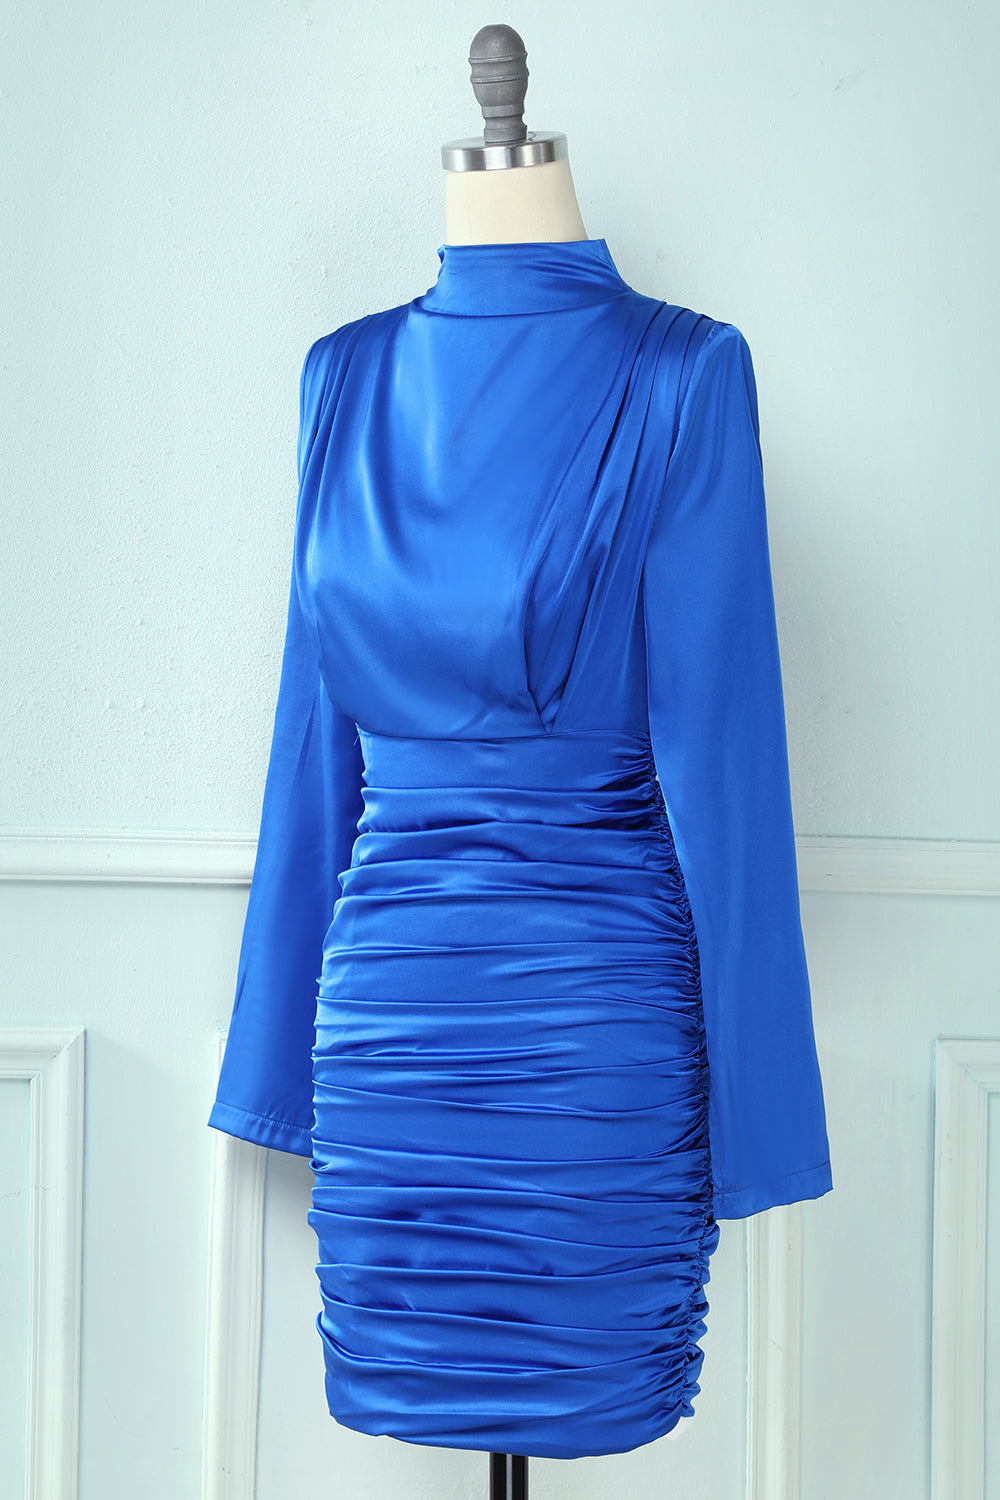 Royal Blue High Neck Bodycon Cocktail Party Dress